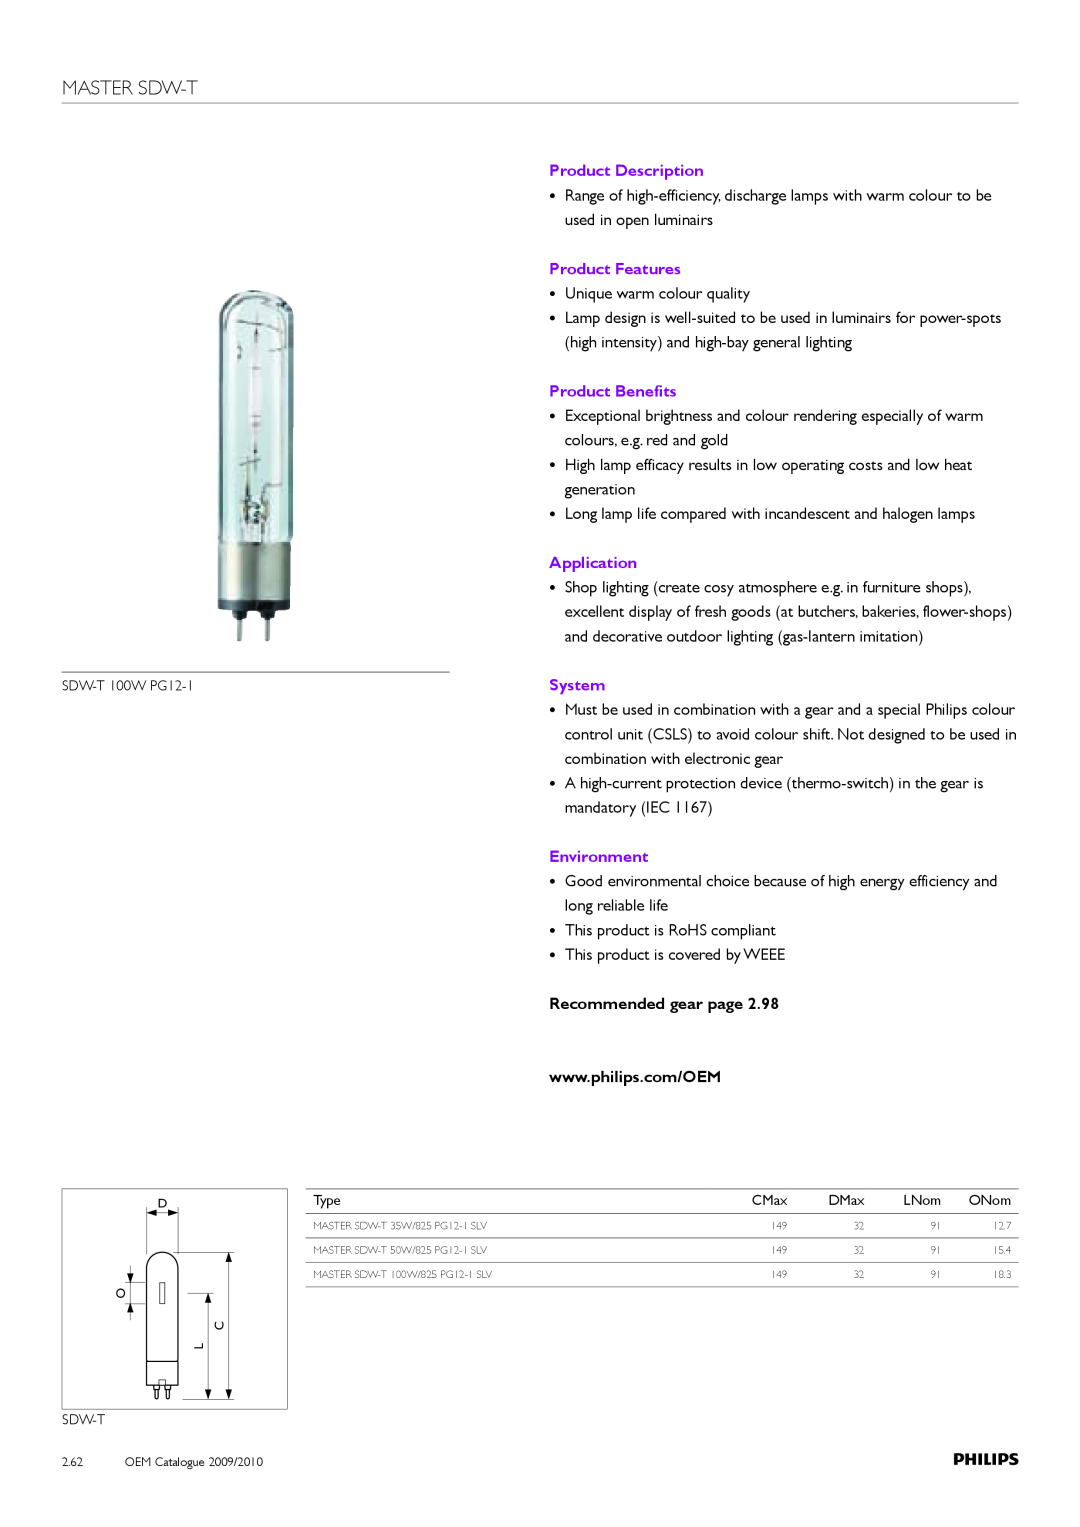 Philips Compact HID Lamp and Gear manual Master Sdw-T, Product Description, Product Features, Product Benefits, Application 